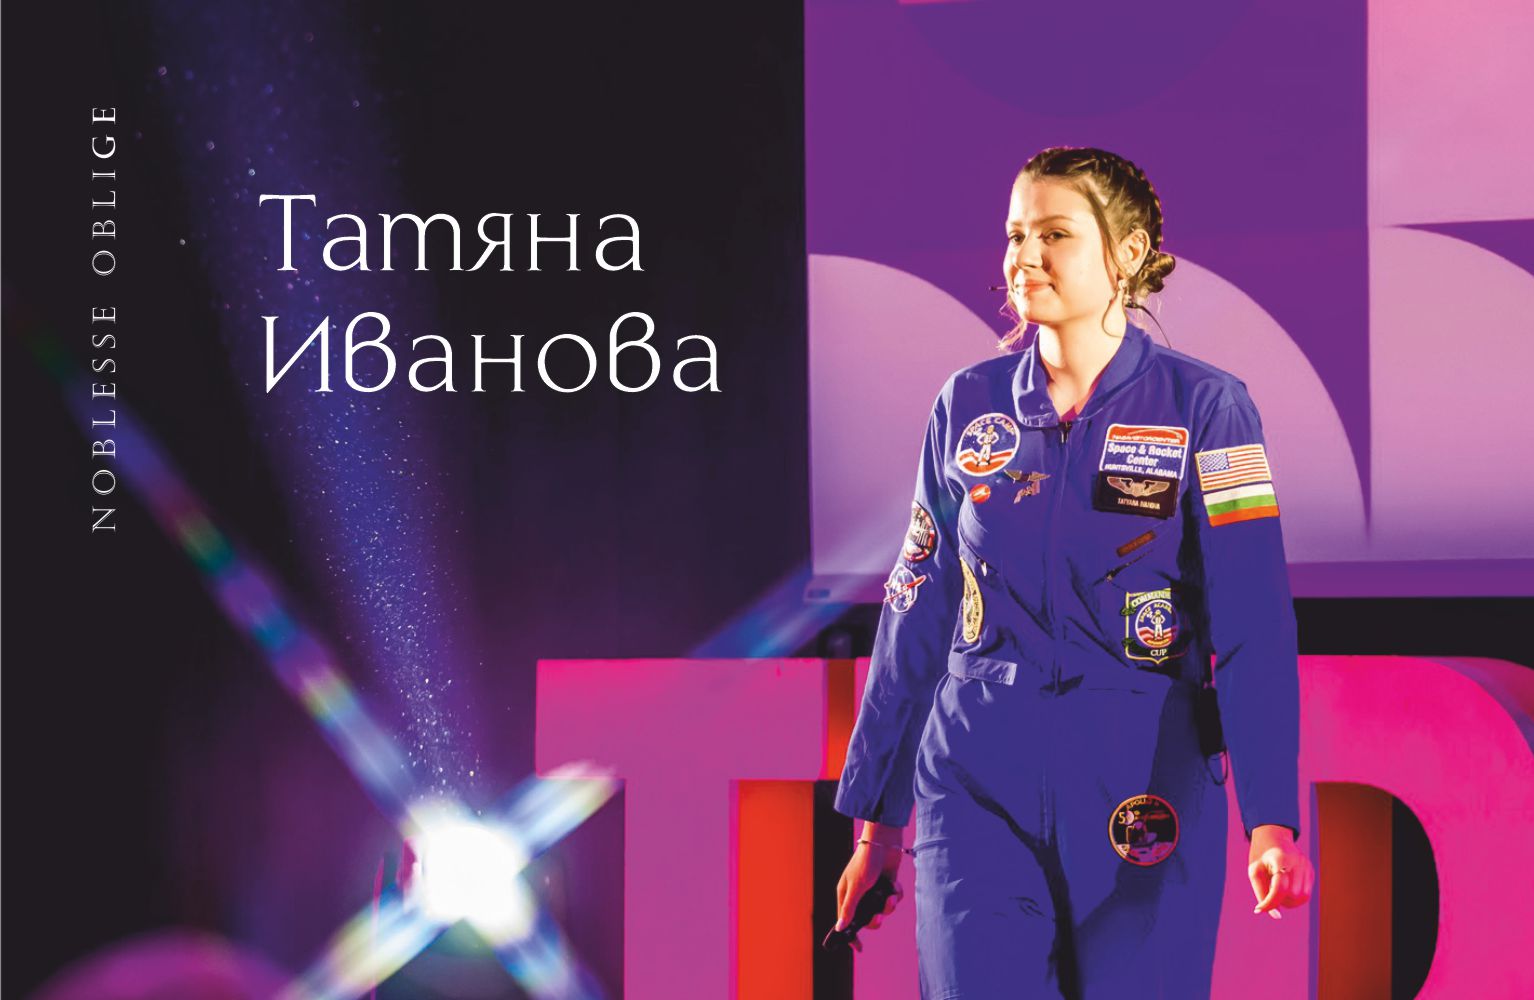 Tatyana Ivanova - remember this name, because one day Bulgaria will be proud of it